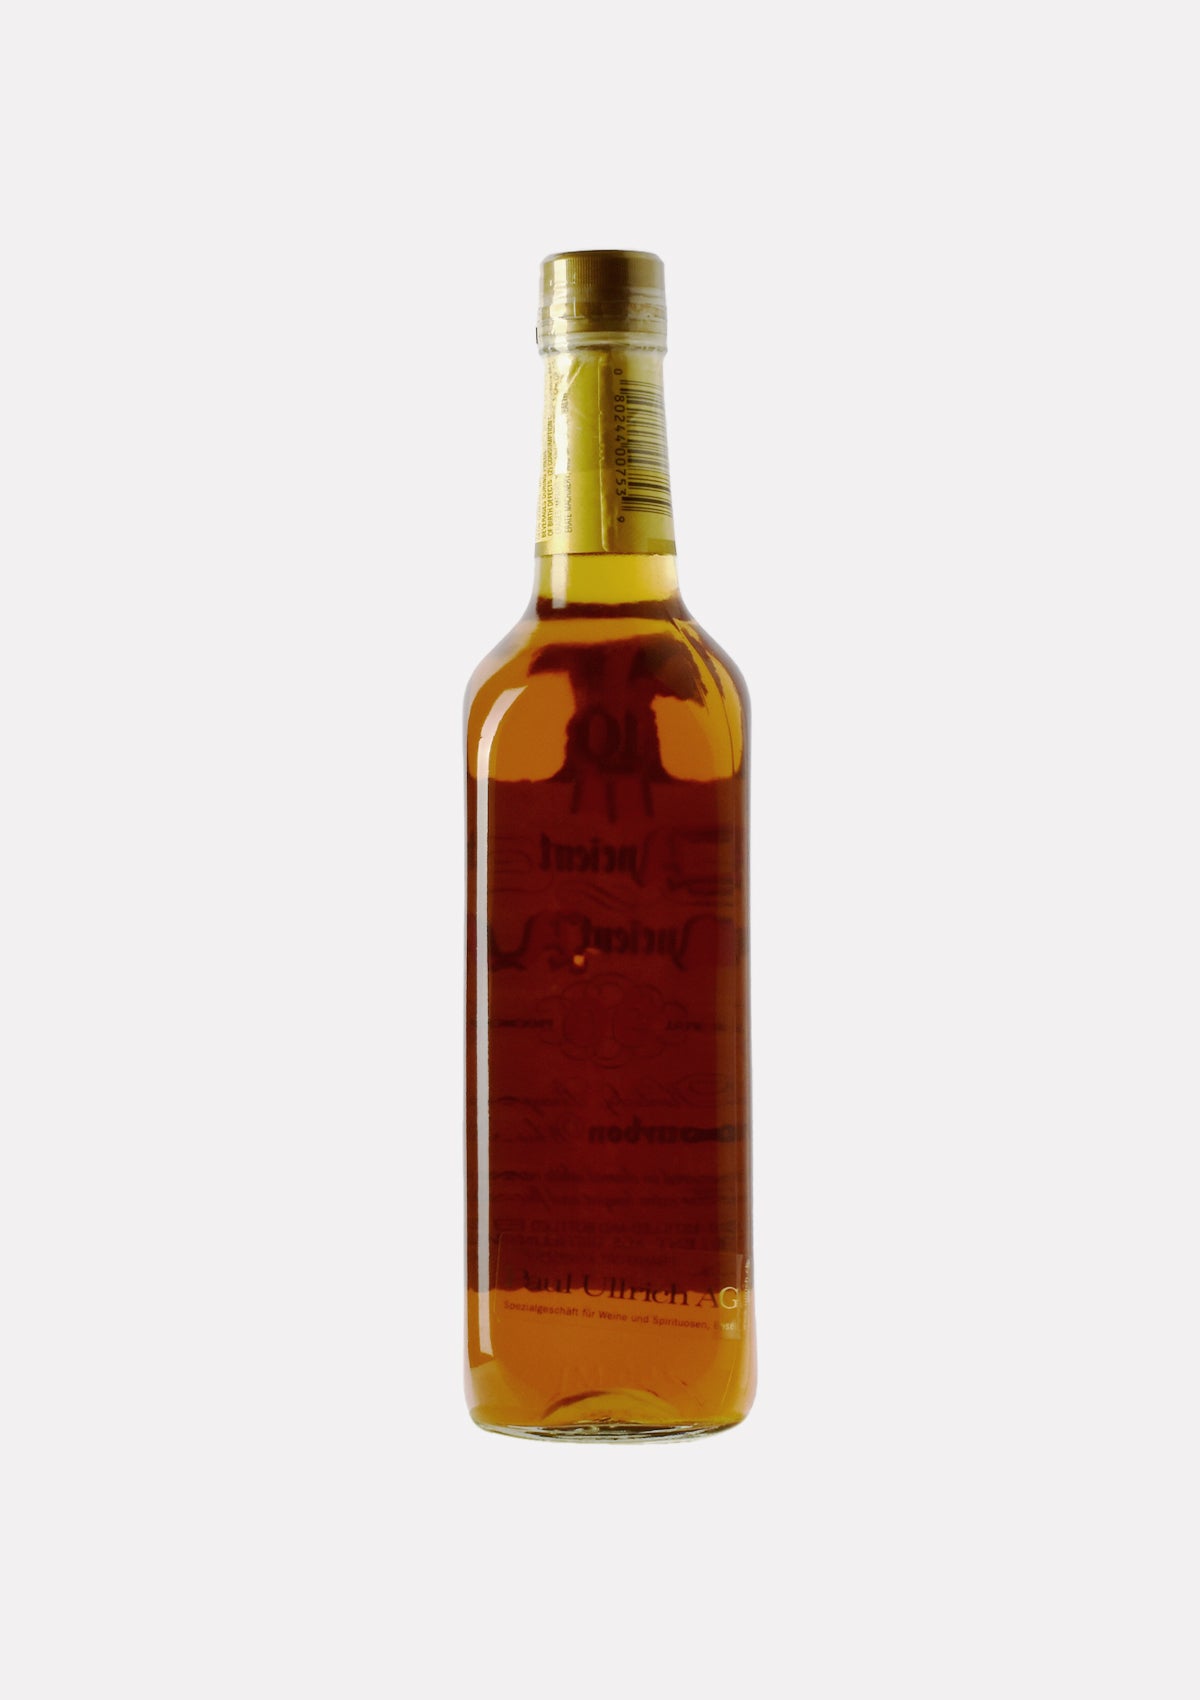 Ancient Age Kentucky Straight Bourbon Whiskey 10 Jahre